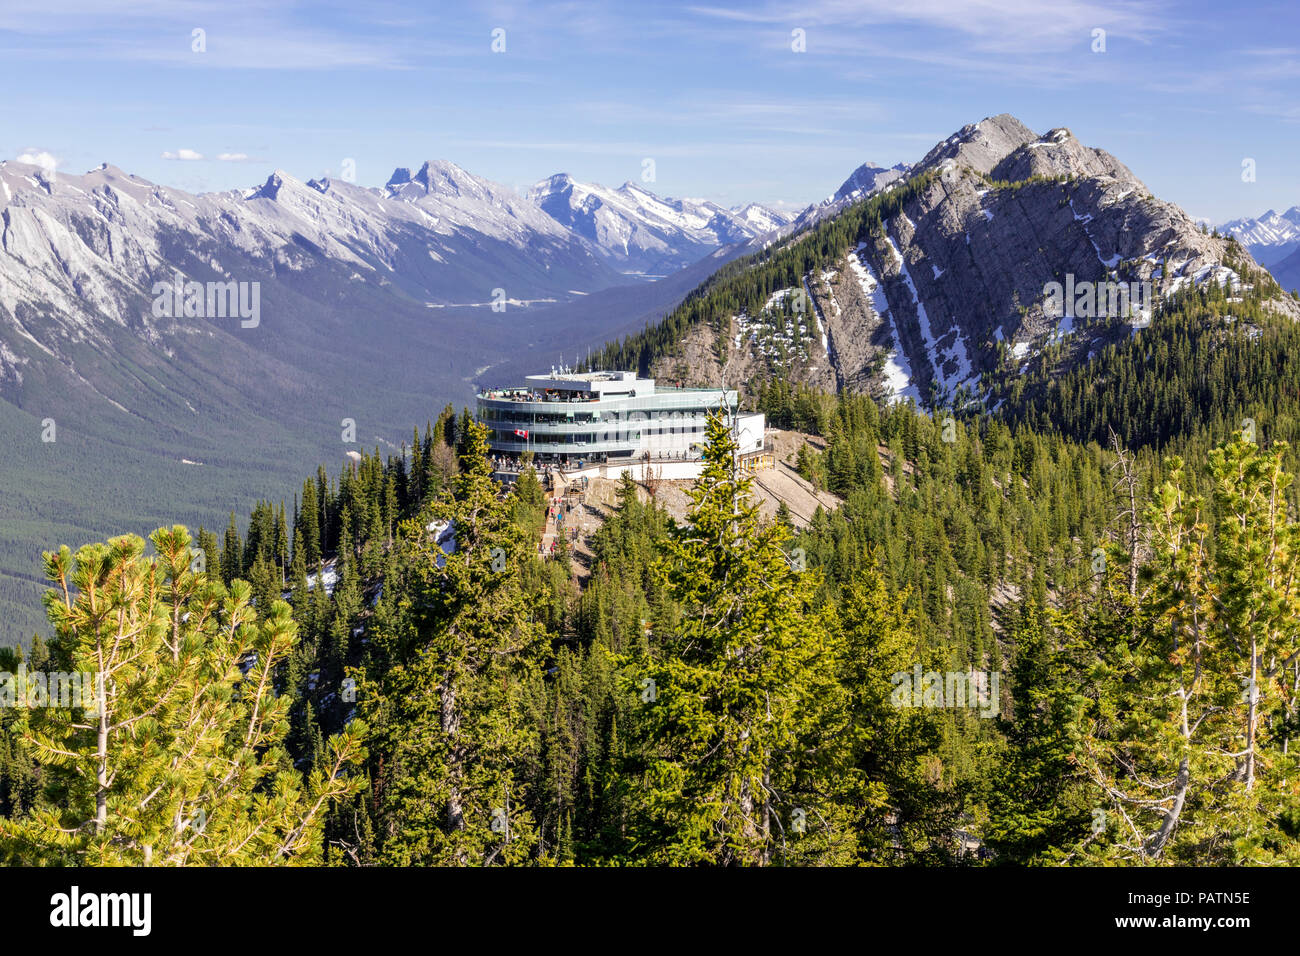 The summit building on Sulphur Mountain in the Rocky Mountains, Banff, Alberta, Canada Stock Photo